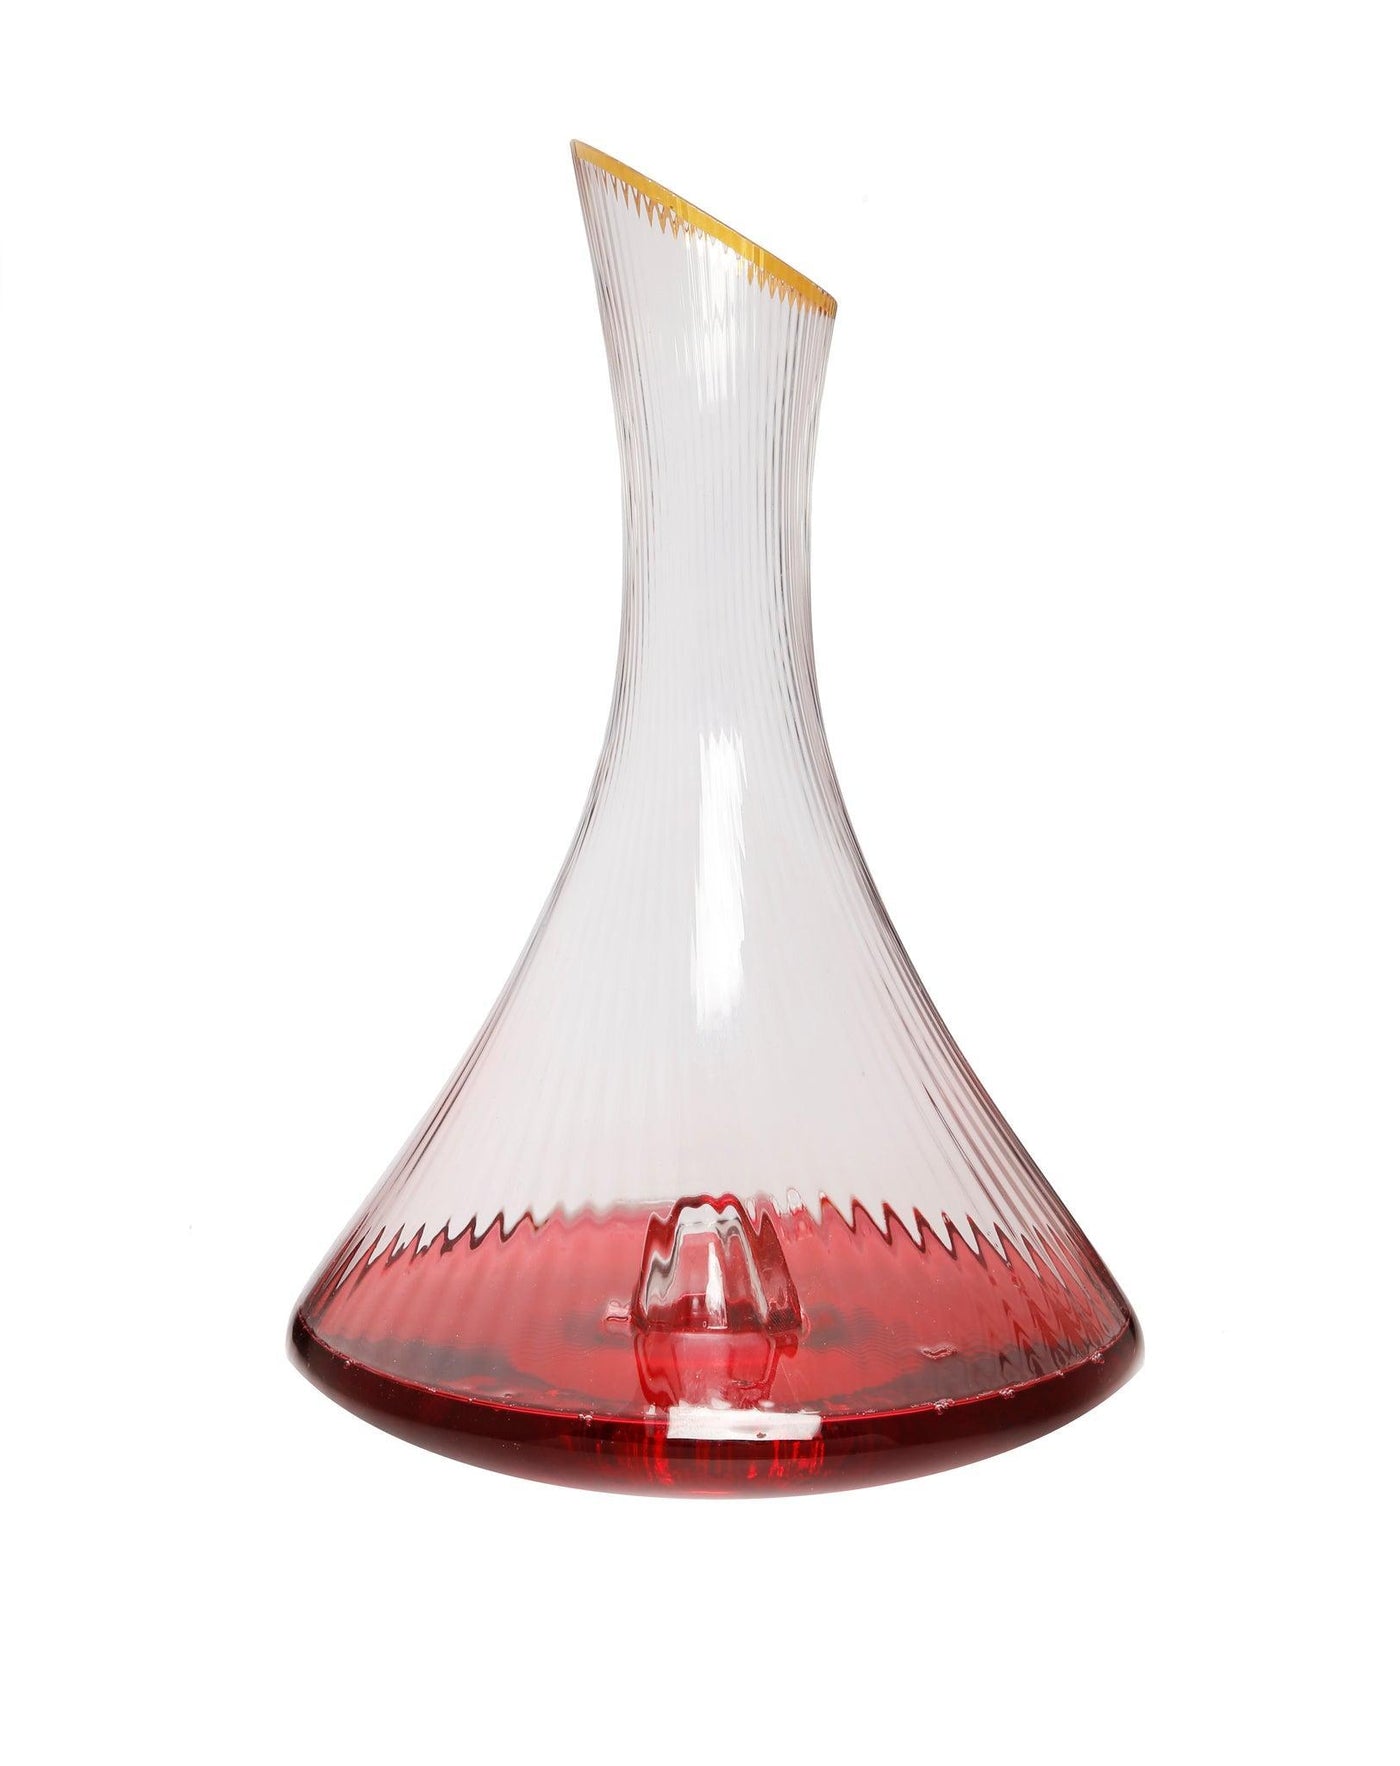 Unique Shaped Decanter with Gold Bottom - Set With Style